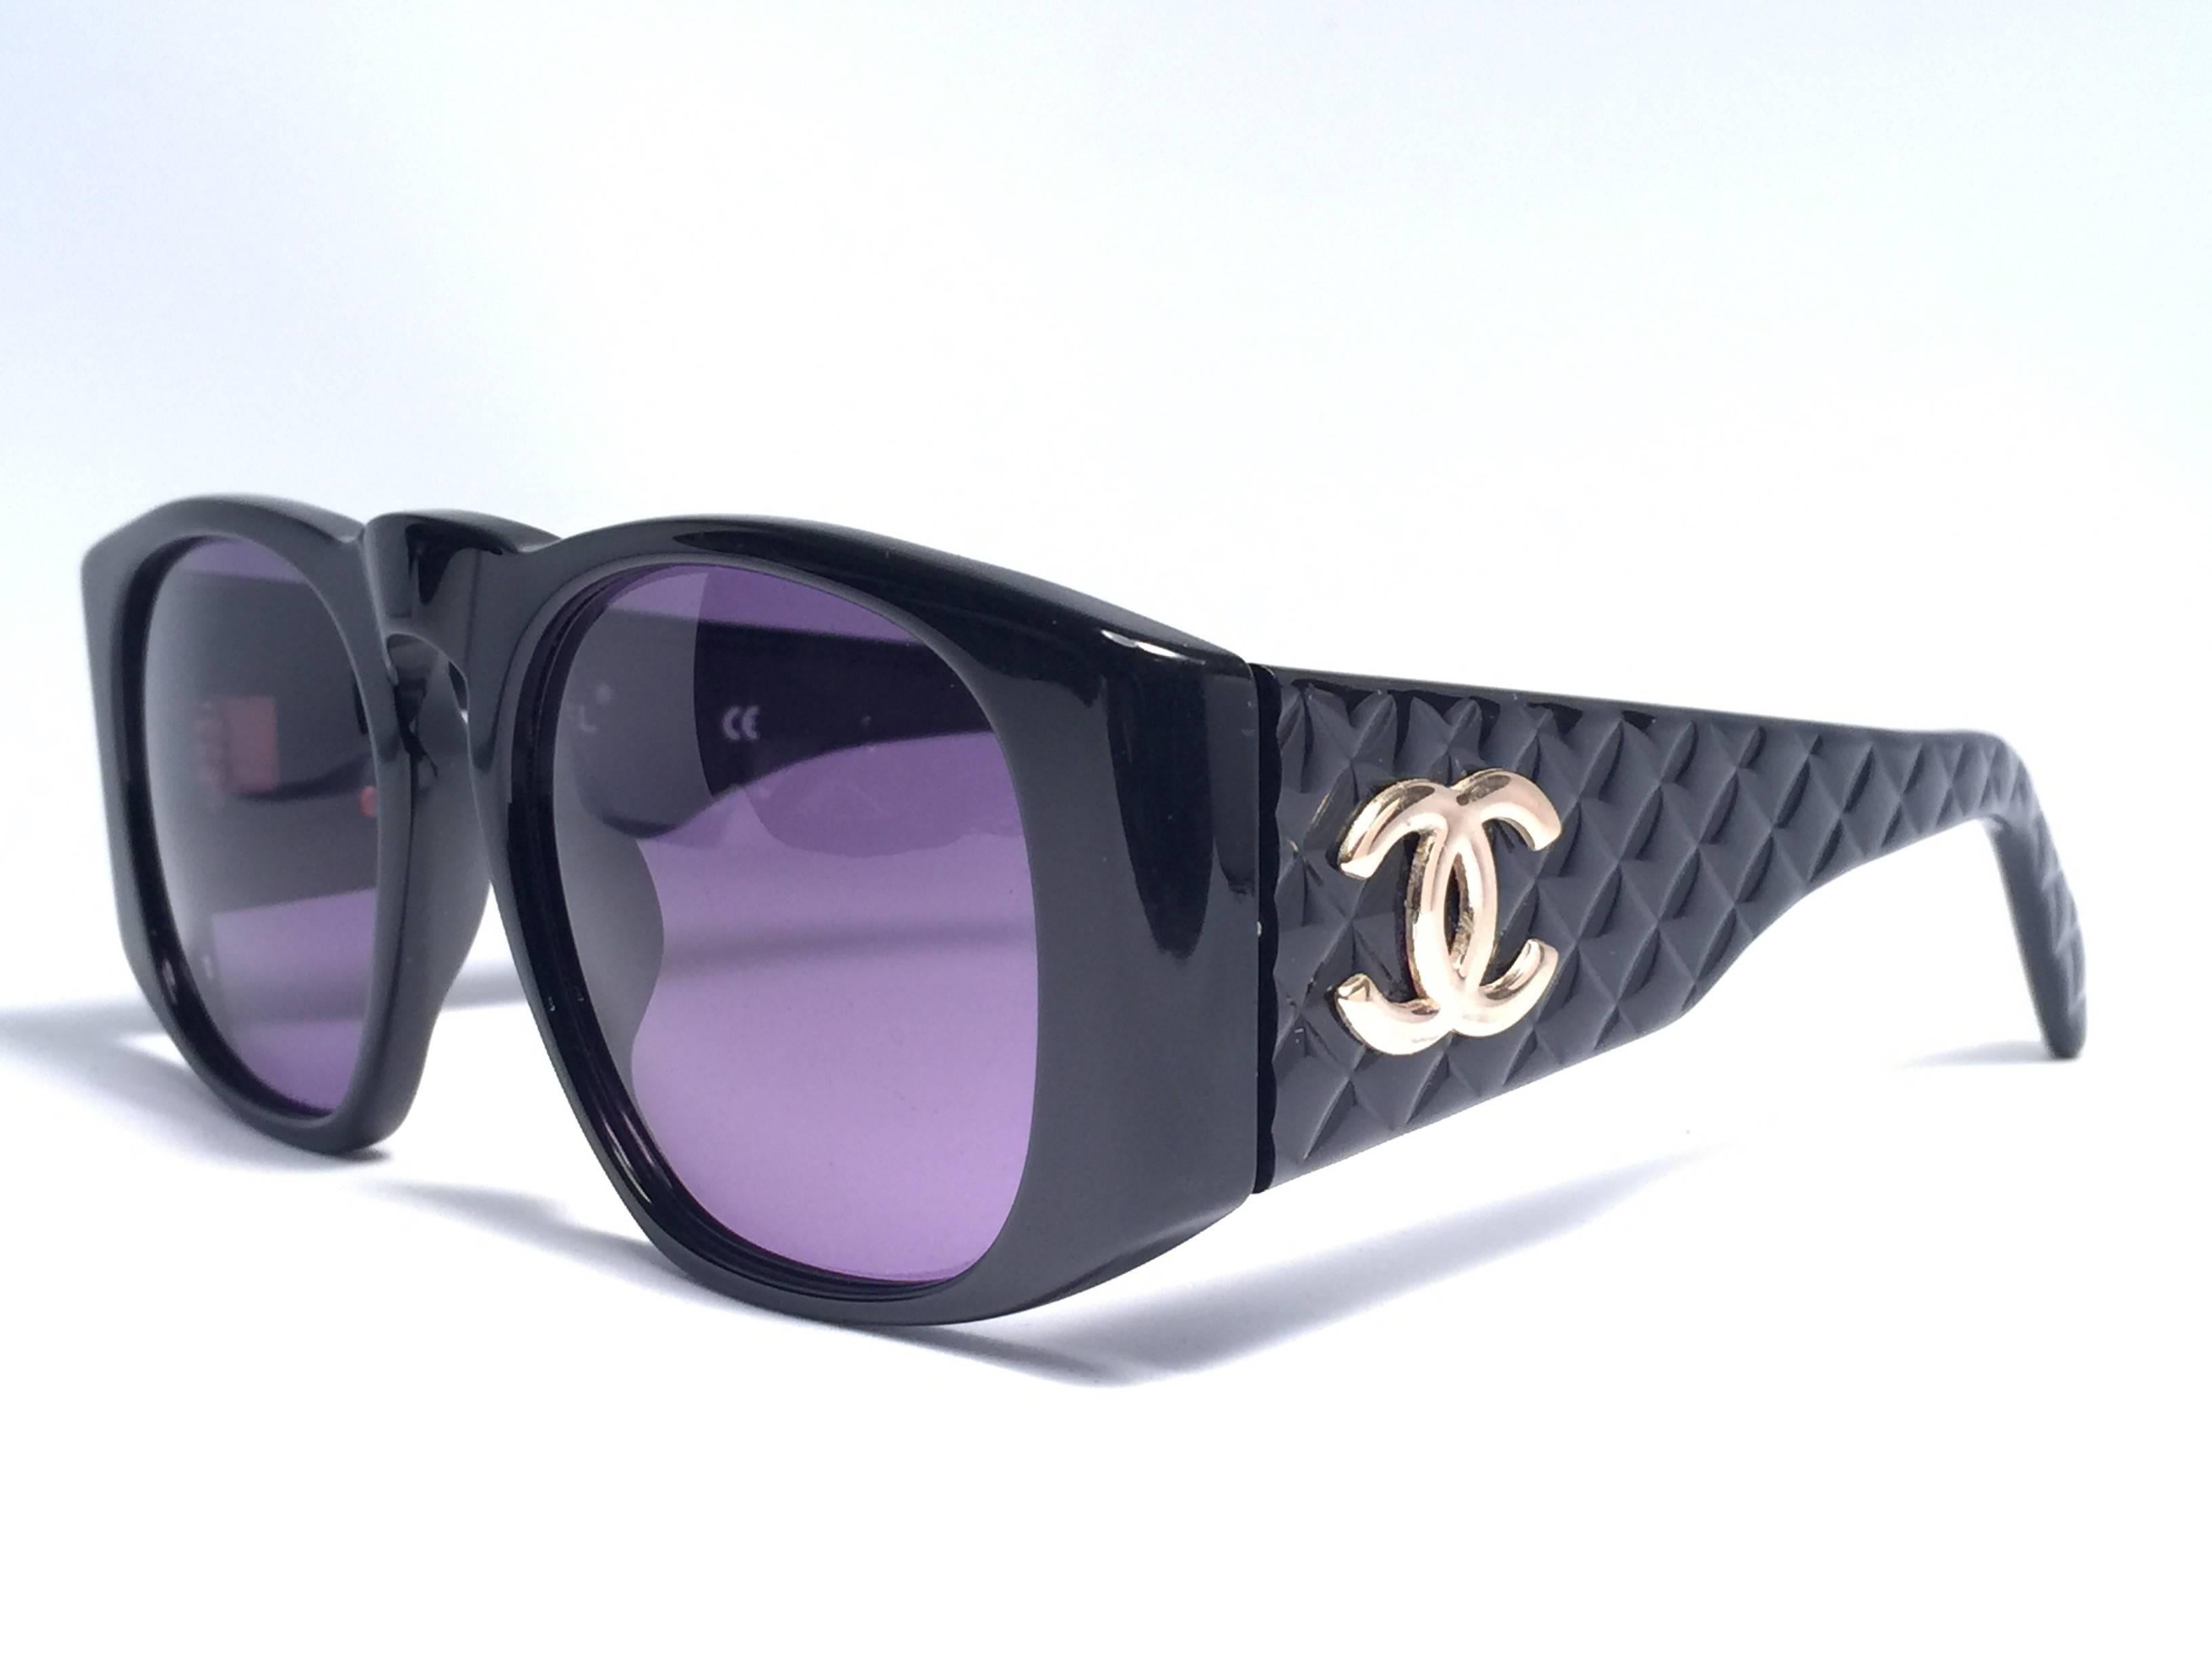 New Vintage Chanel Black quilted sunglasses with spotless smoke grey lenses for a total incognito look.

New, never worn or displayed, this pair of Chanel sunglasses is an absolute showstopper.